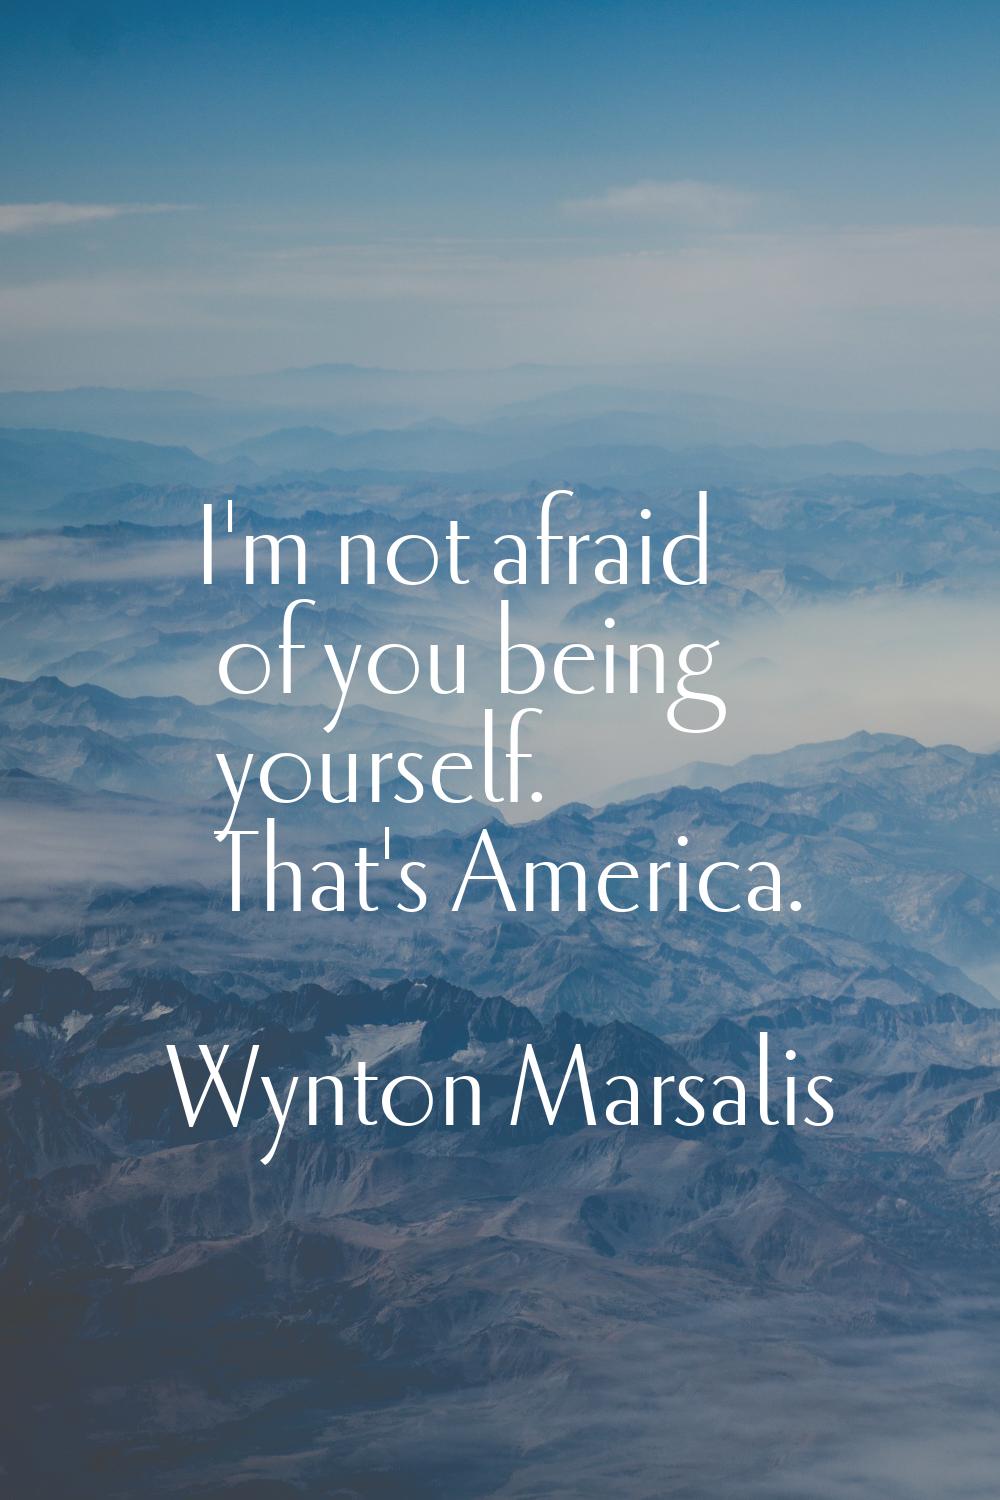 I'm not afraid of you being yourself. That's America.